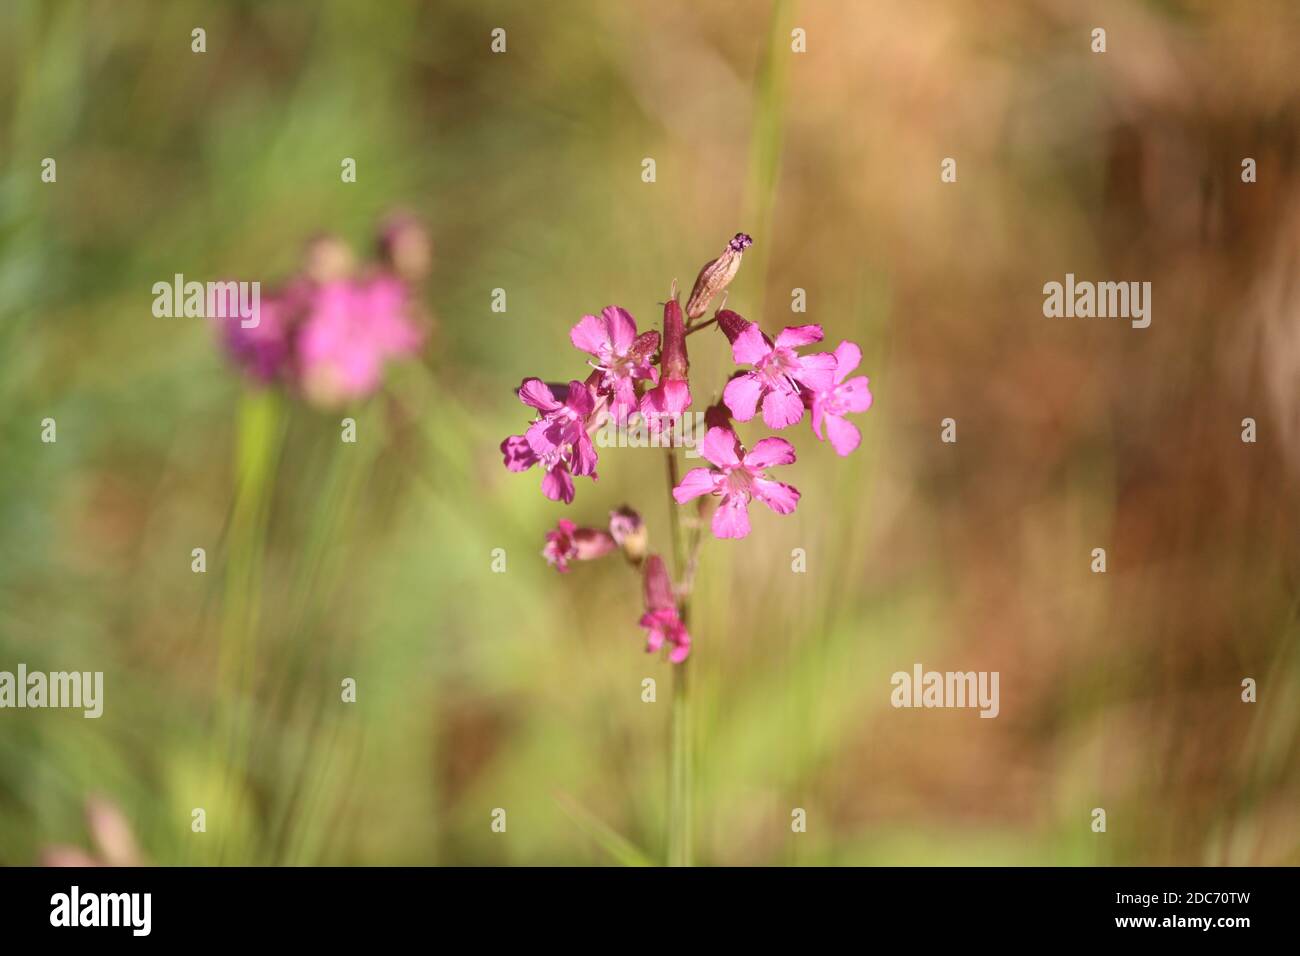 Amazing inflorescences of flower Viscaria vulgaris with pink petals on a sunny meadow in a summer day on a blurred green background. Pink wildflowers. Stock Photo